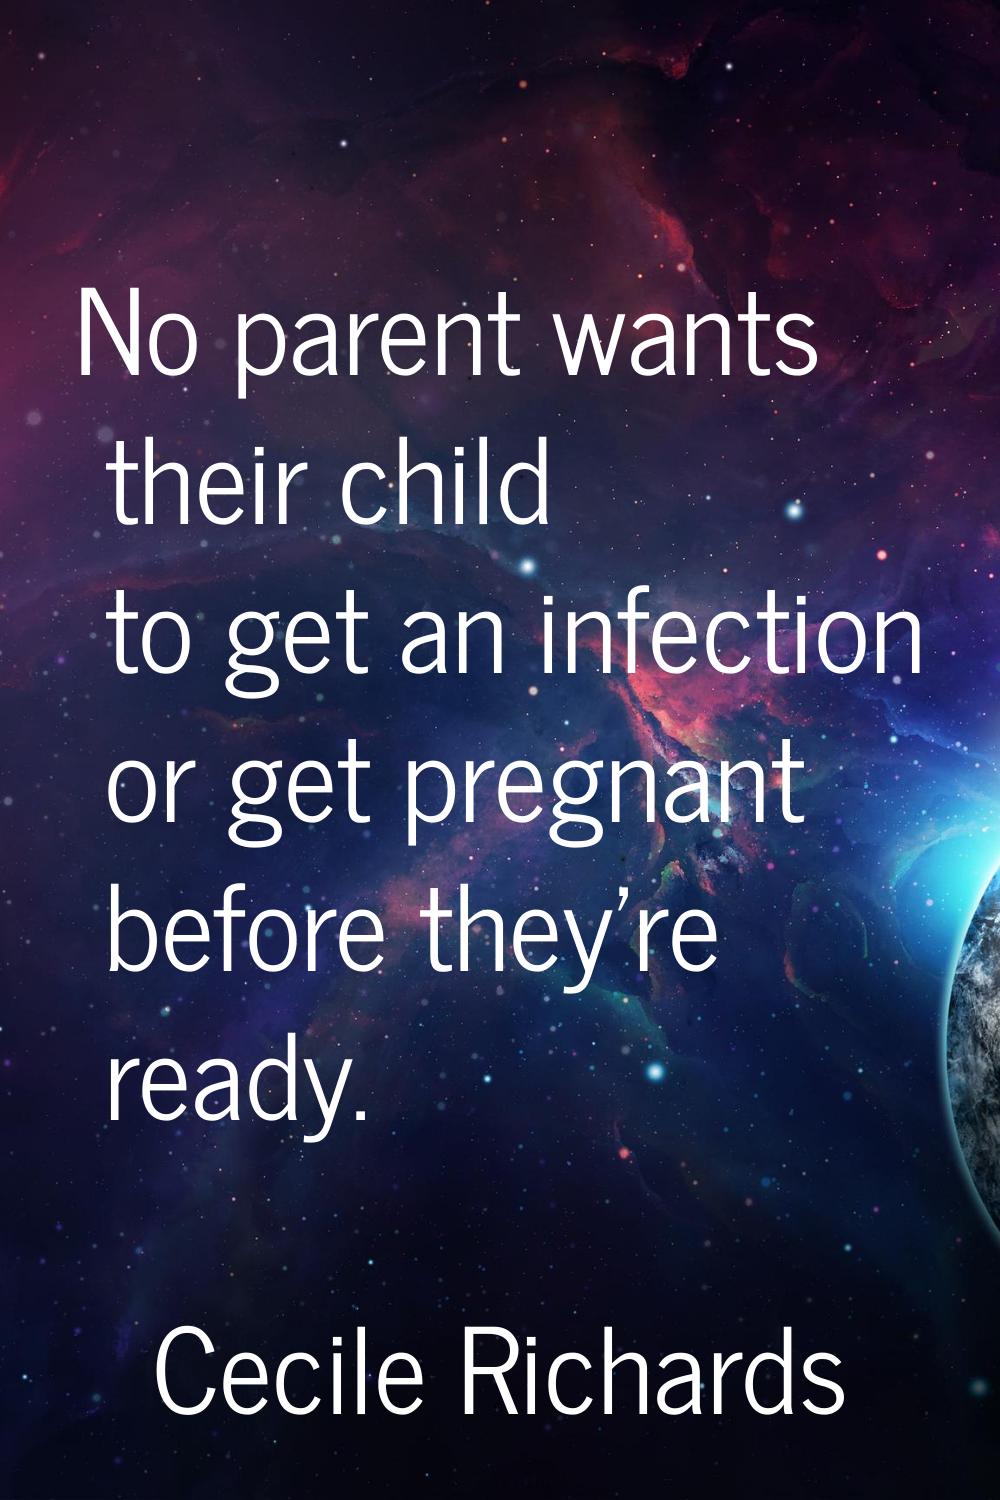 No parent wants their child to get an infection or get pregnant before they're ready.